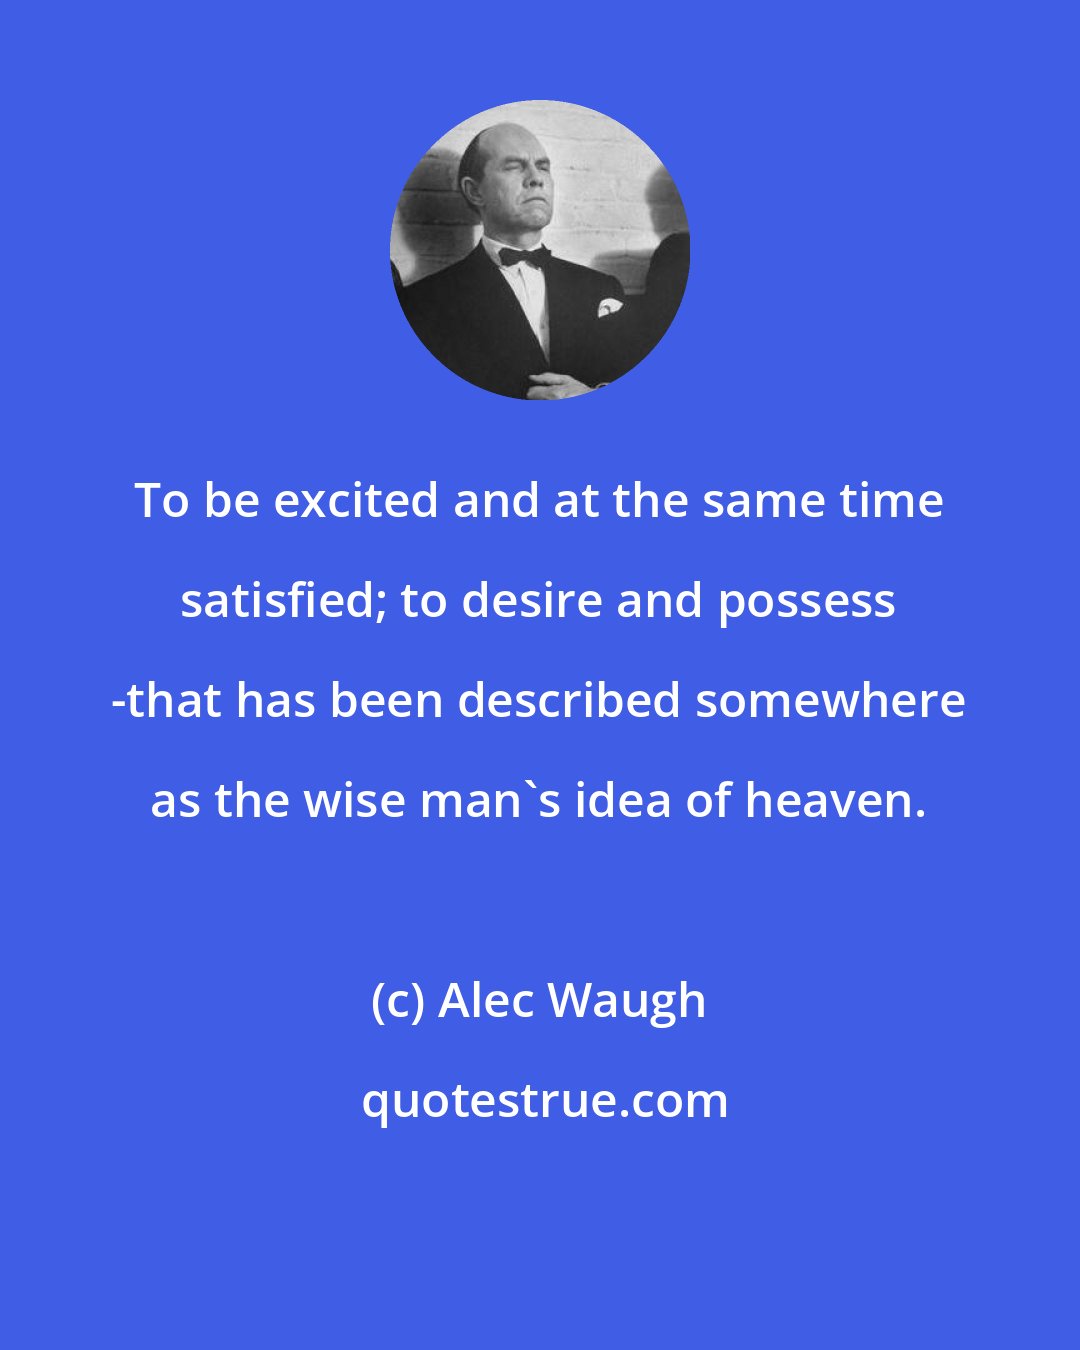 Alec Waugh: To be excited and at the same time satisfied; to desire and possess -that has been described somewhere as the wise man's idea of heaven.